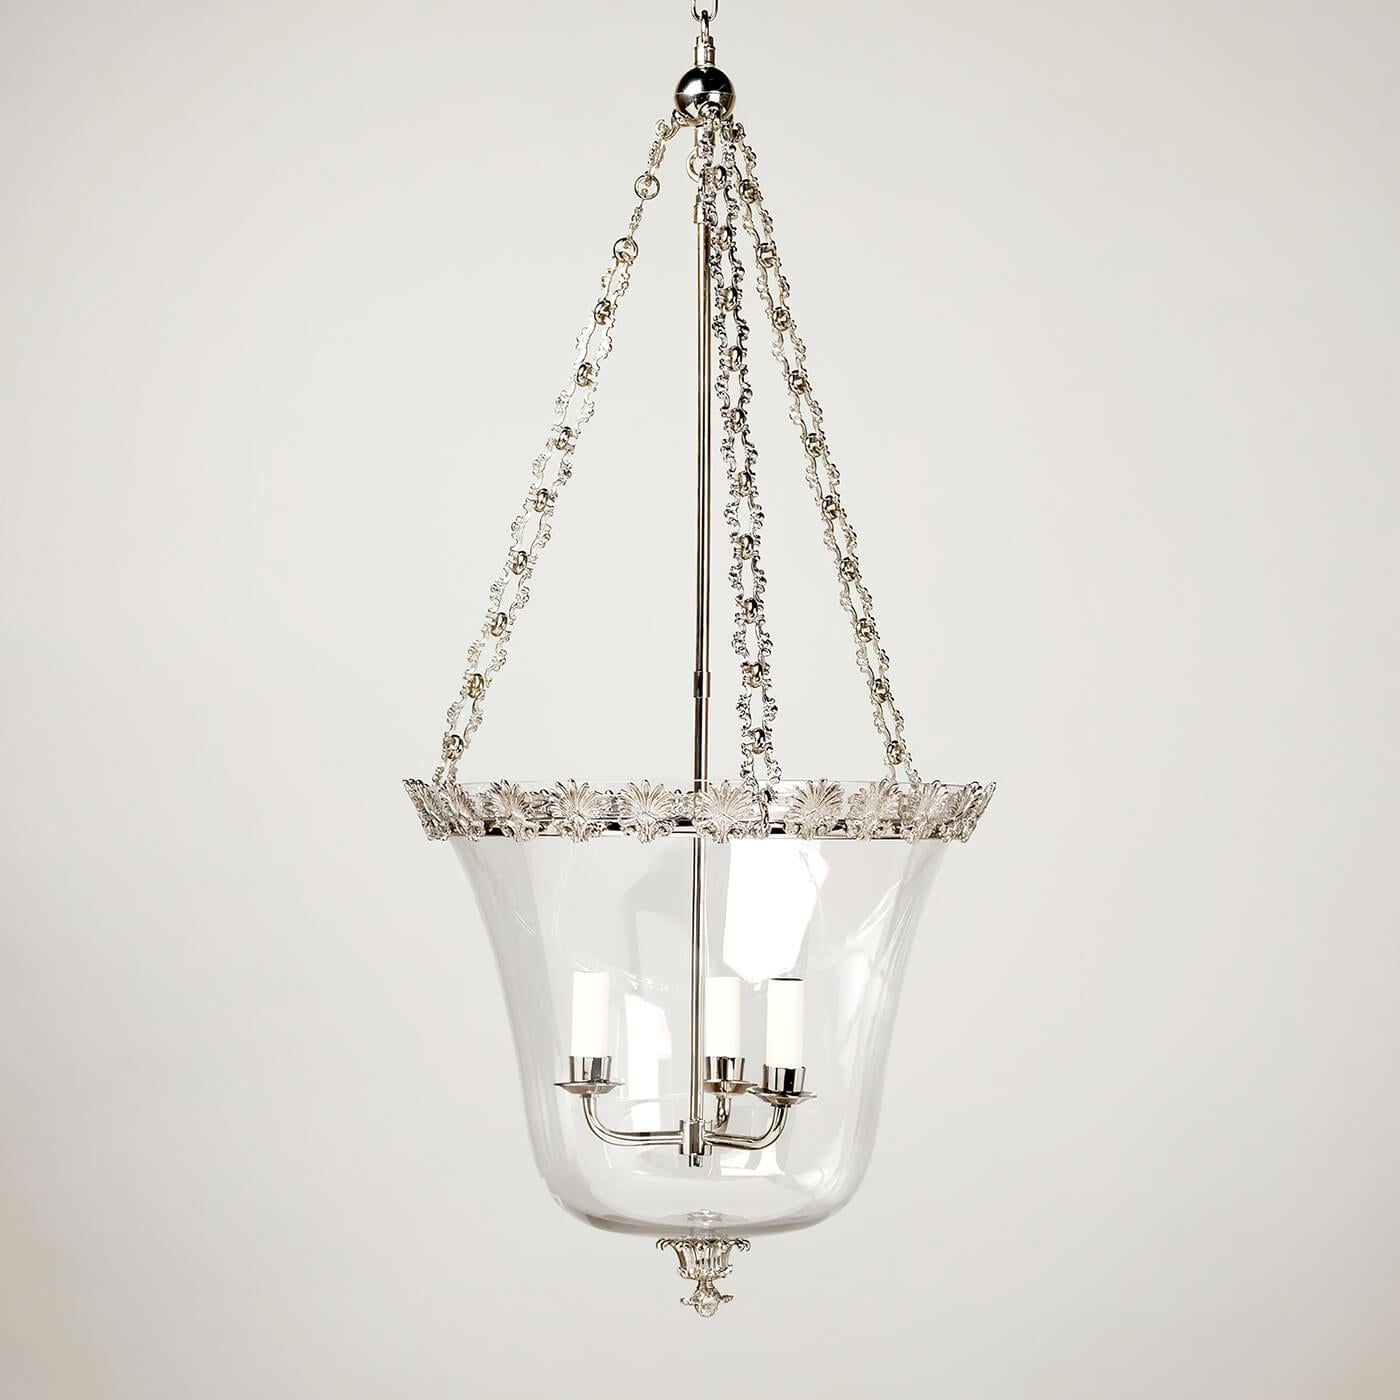 Regency Palmette cloche lantern, this three-light lantern design features intricate metalwork and a decorative hand-blown globe. The acanthus leaf Palmette motif on the band and the ornate chain, complement the simple glass bowl. Fabricated from